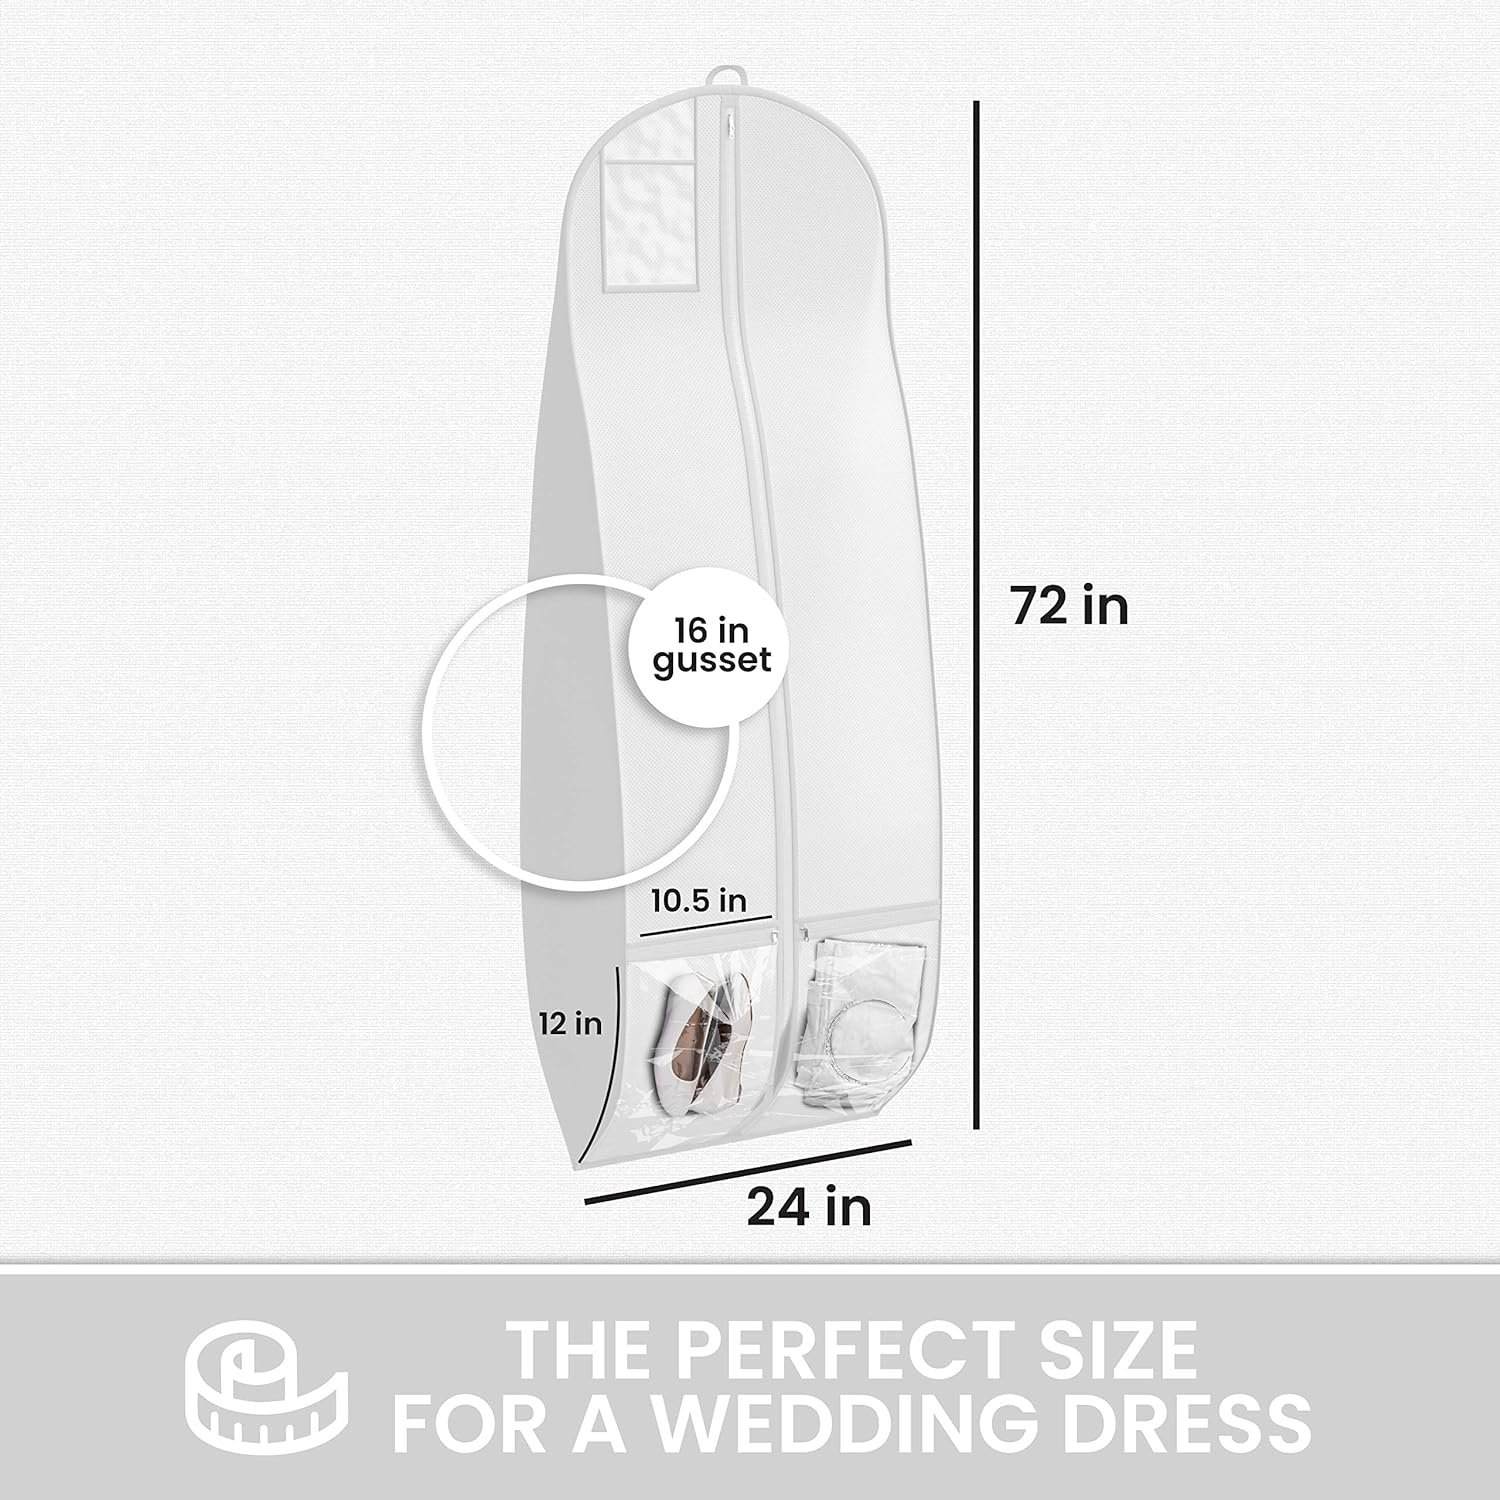 Wedding Dress Garment Bag 16 inch Gusset, with Shoe Pockets and Handle Durable, Rip and Water Resistant Material Large Size Clear Vinyl Pouch for Labeling